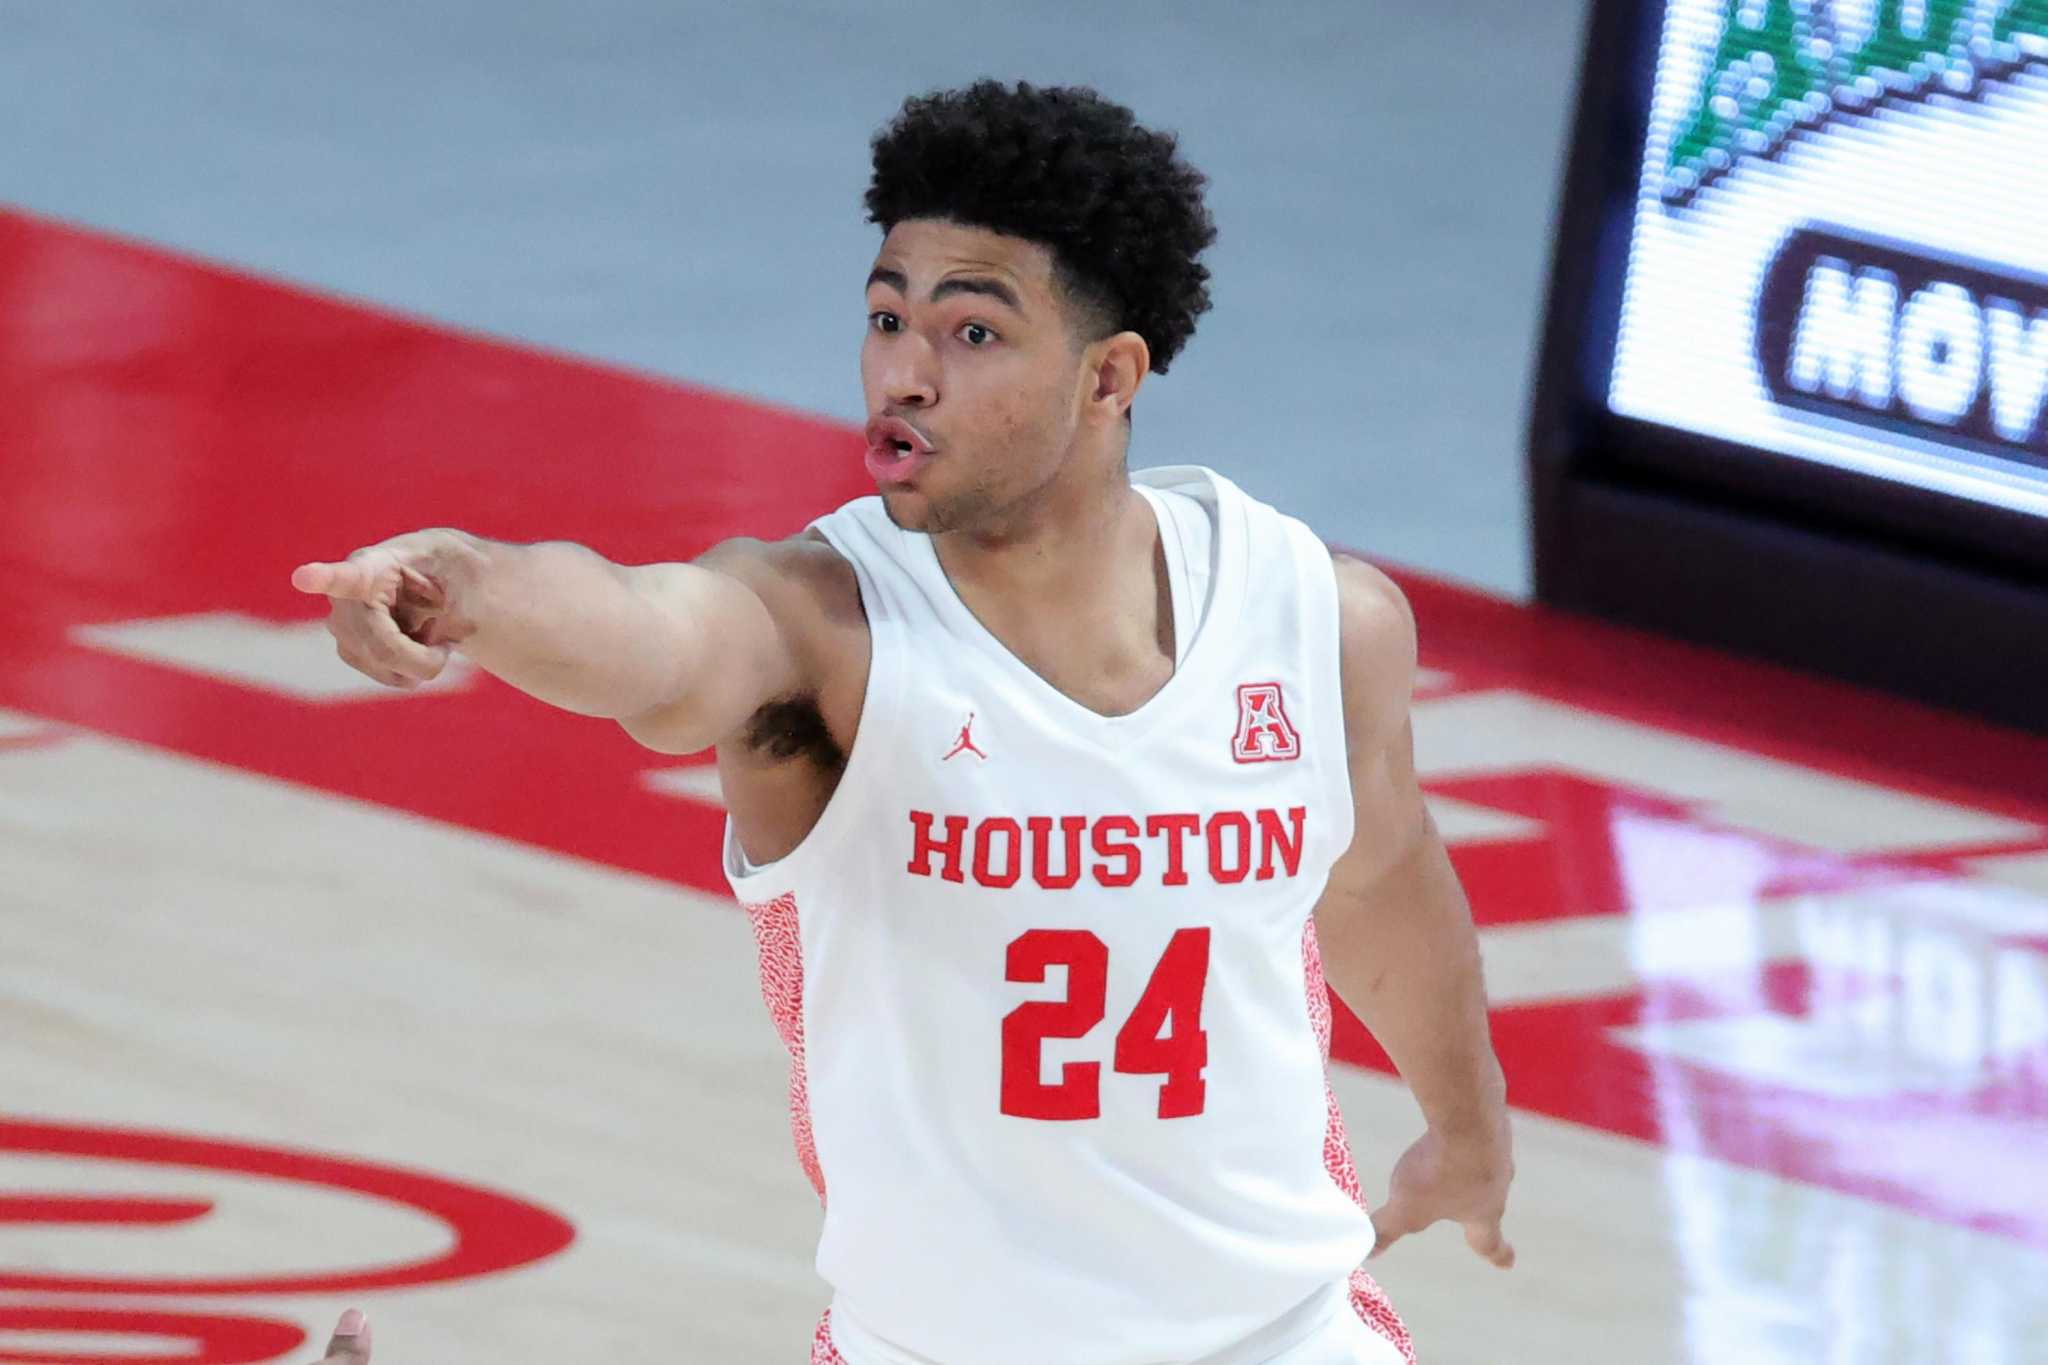 Former University of Houston basketball star Quentin Grimes has jersey  retired by alma mater College Park High School - ABC13 Houston